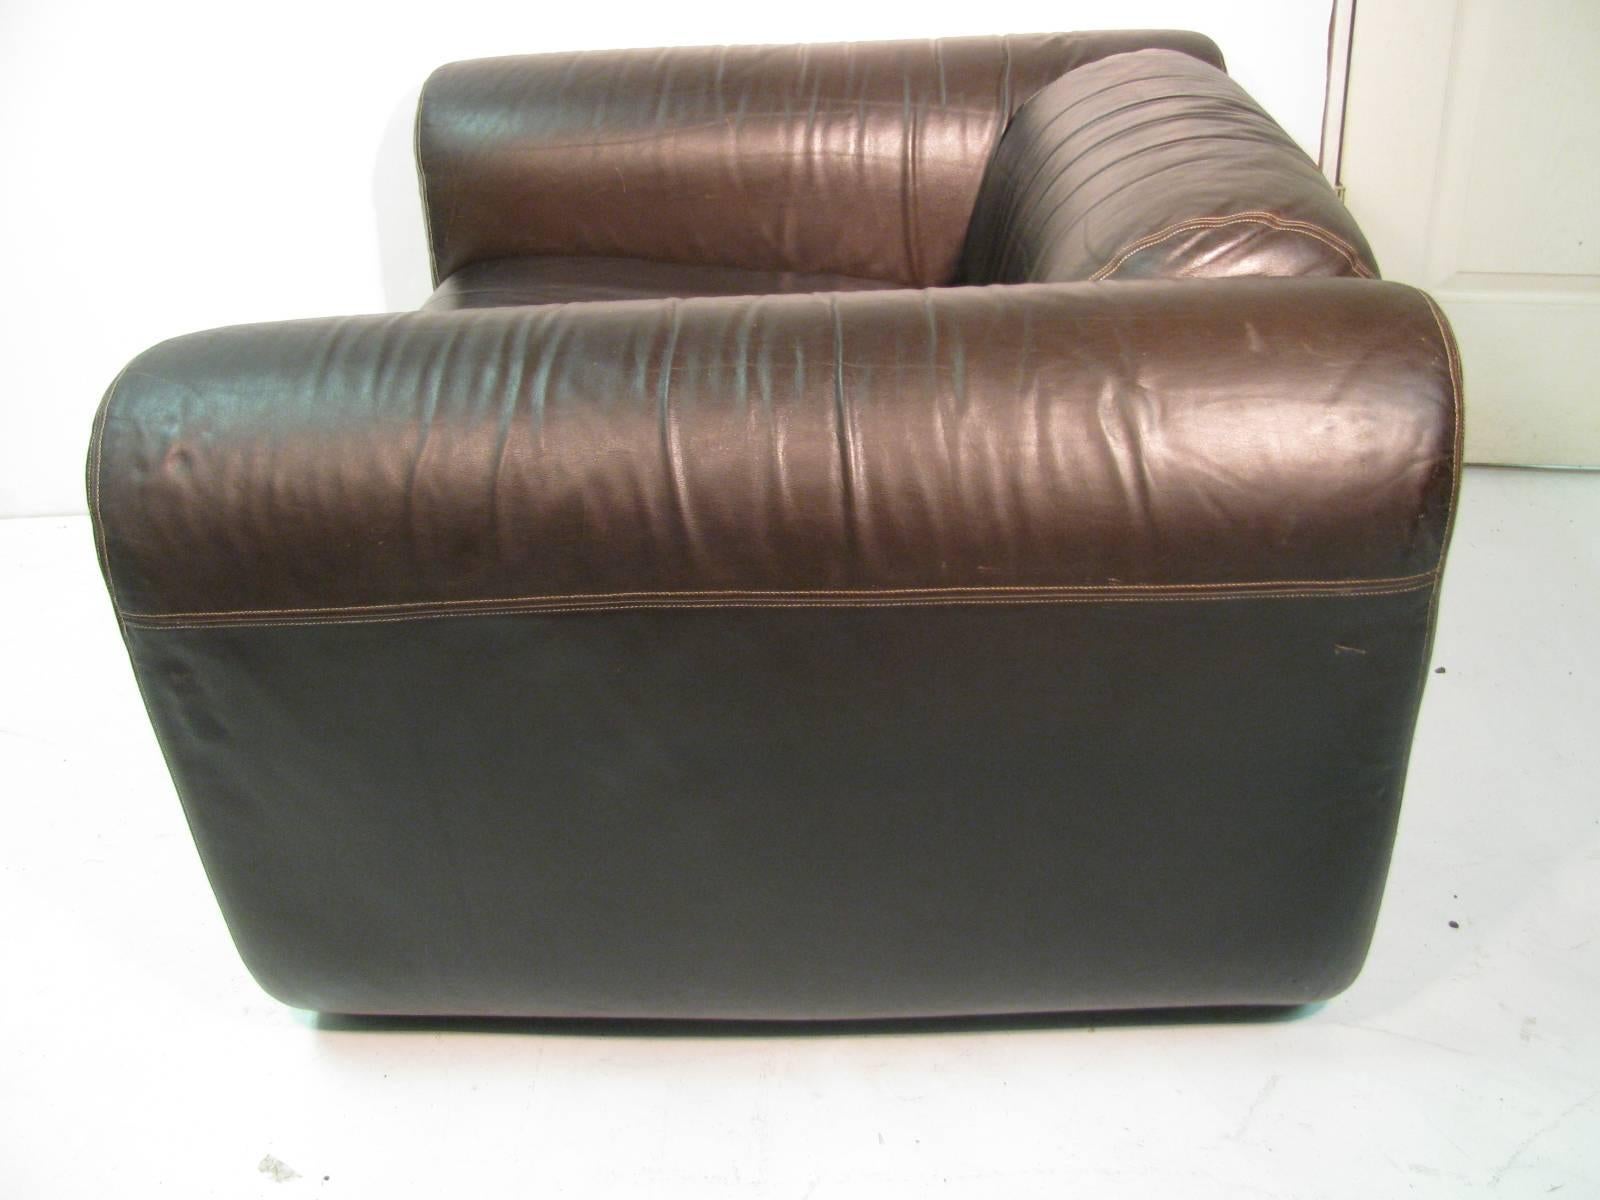 Fabulous pair of brown leather lounge chairs by Stendig. In the style of the Cumulus Group that was created by Italian designers Sergio Mazza and Giulano Gramina for Stendig.